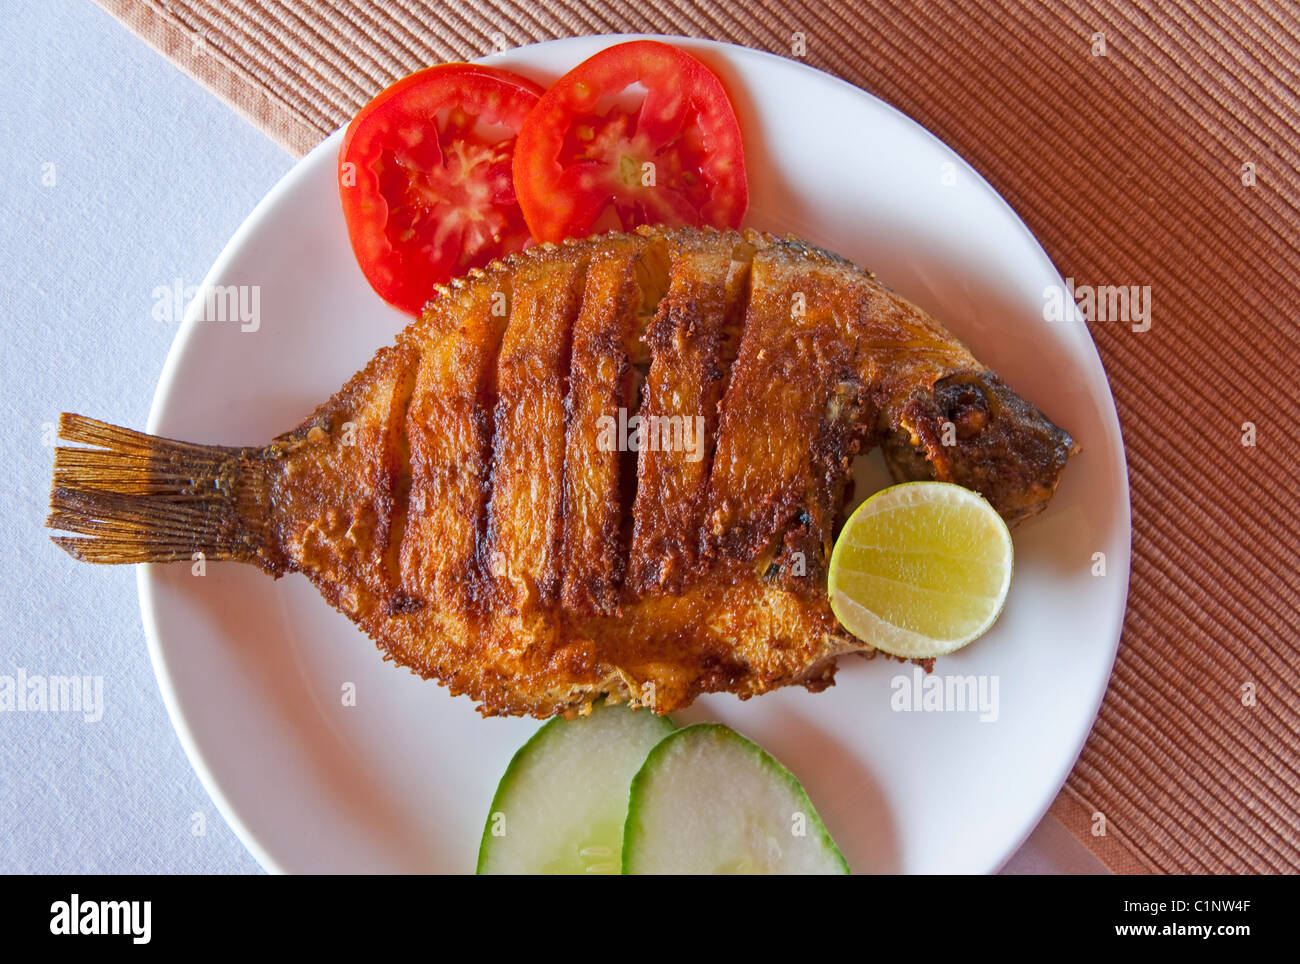 Fried fish lunch on houseboat cruise of the tropical Kerala Backwaters on the Malabar coast of South India. Stock Photo